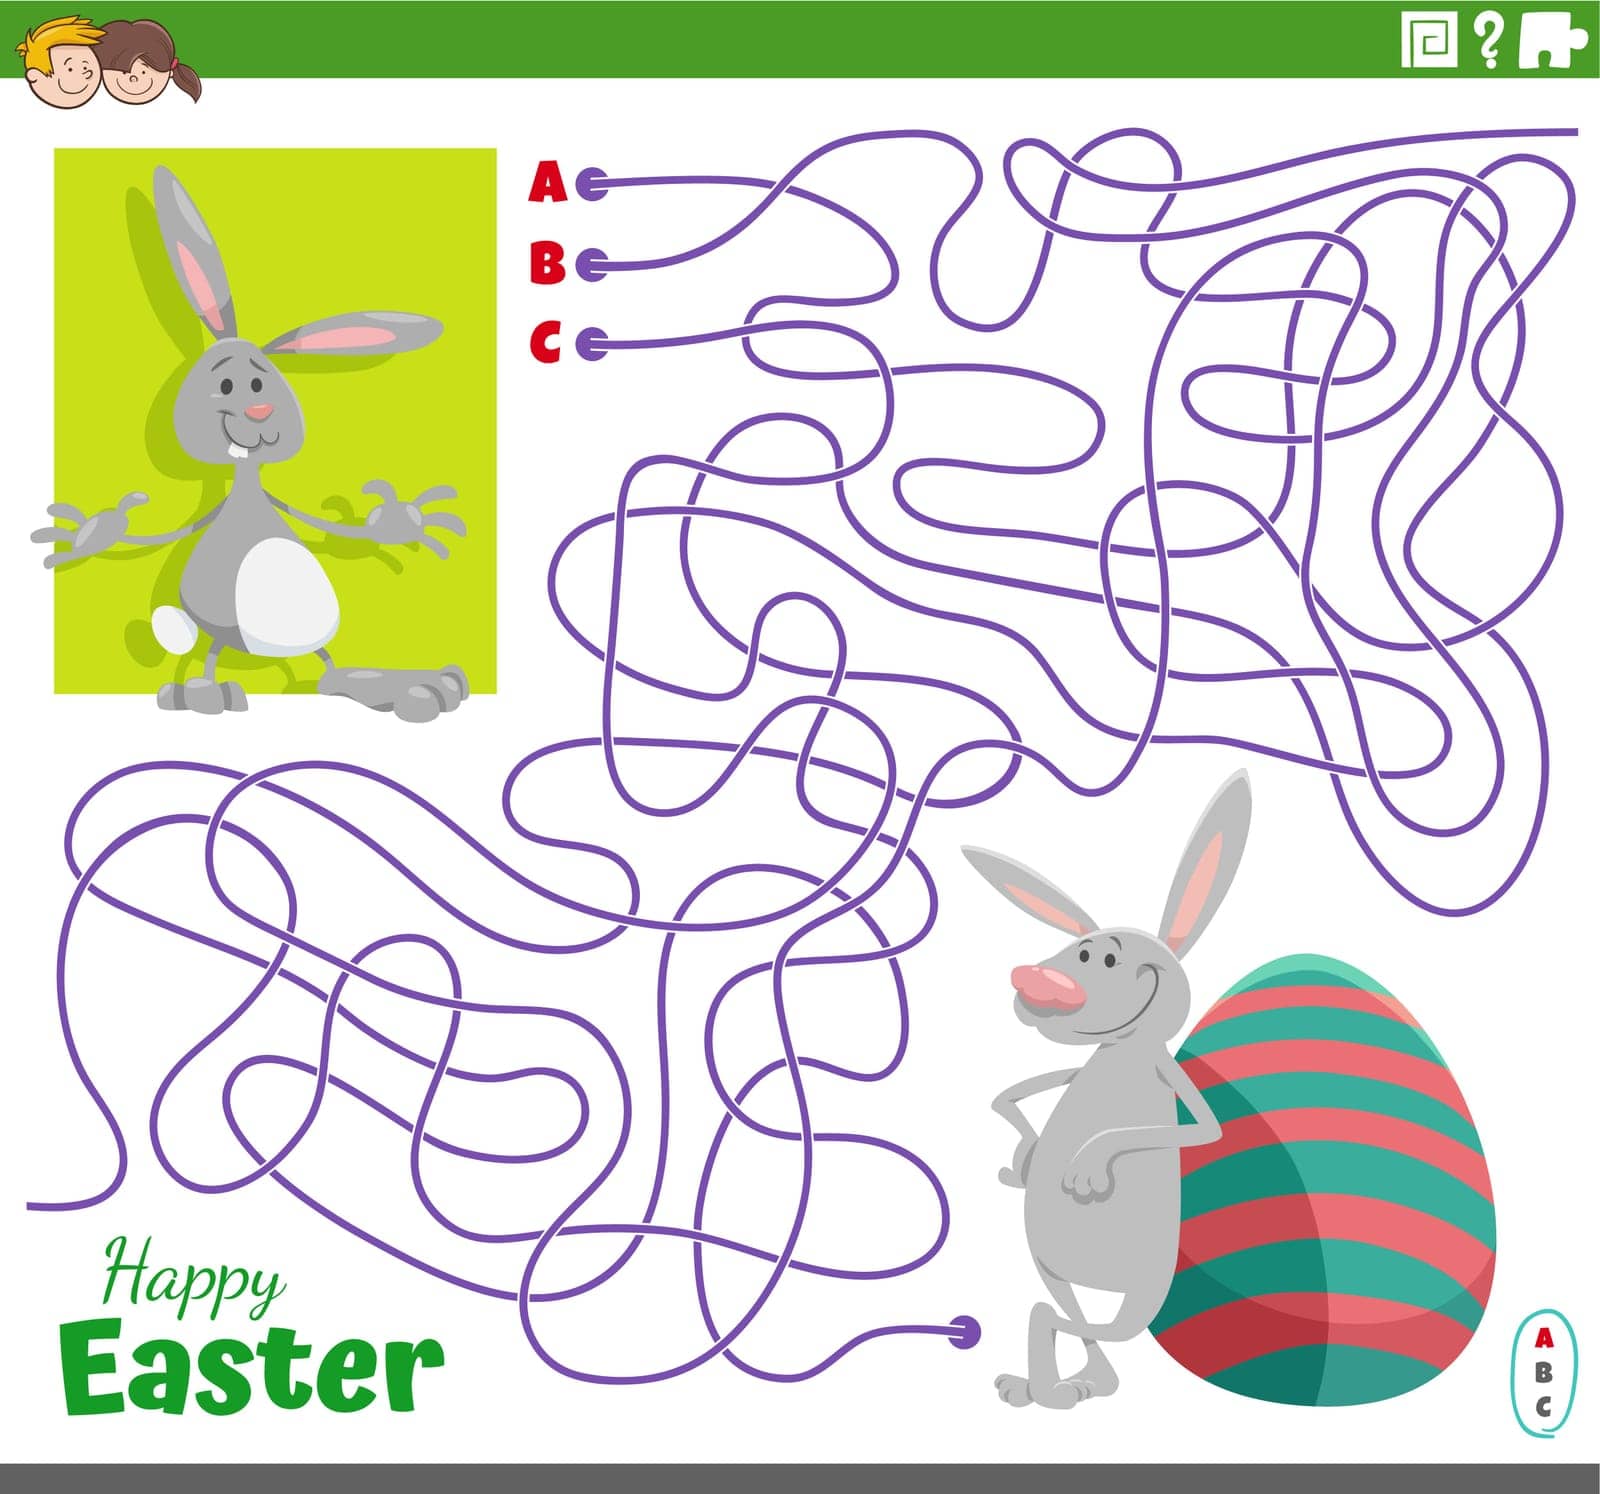 path maze game with cartoon Easter Bunnies characters by izakowski